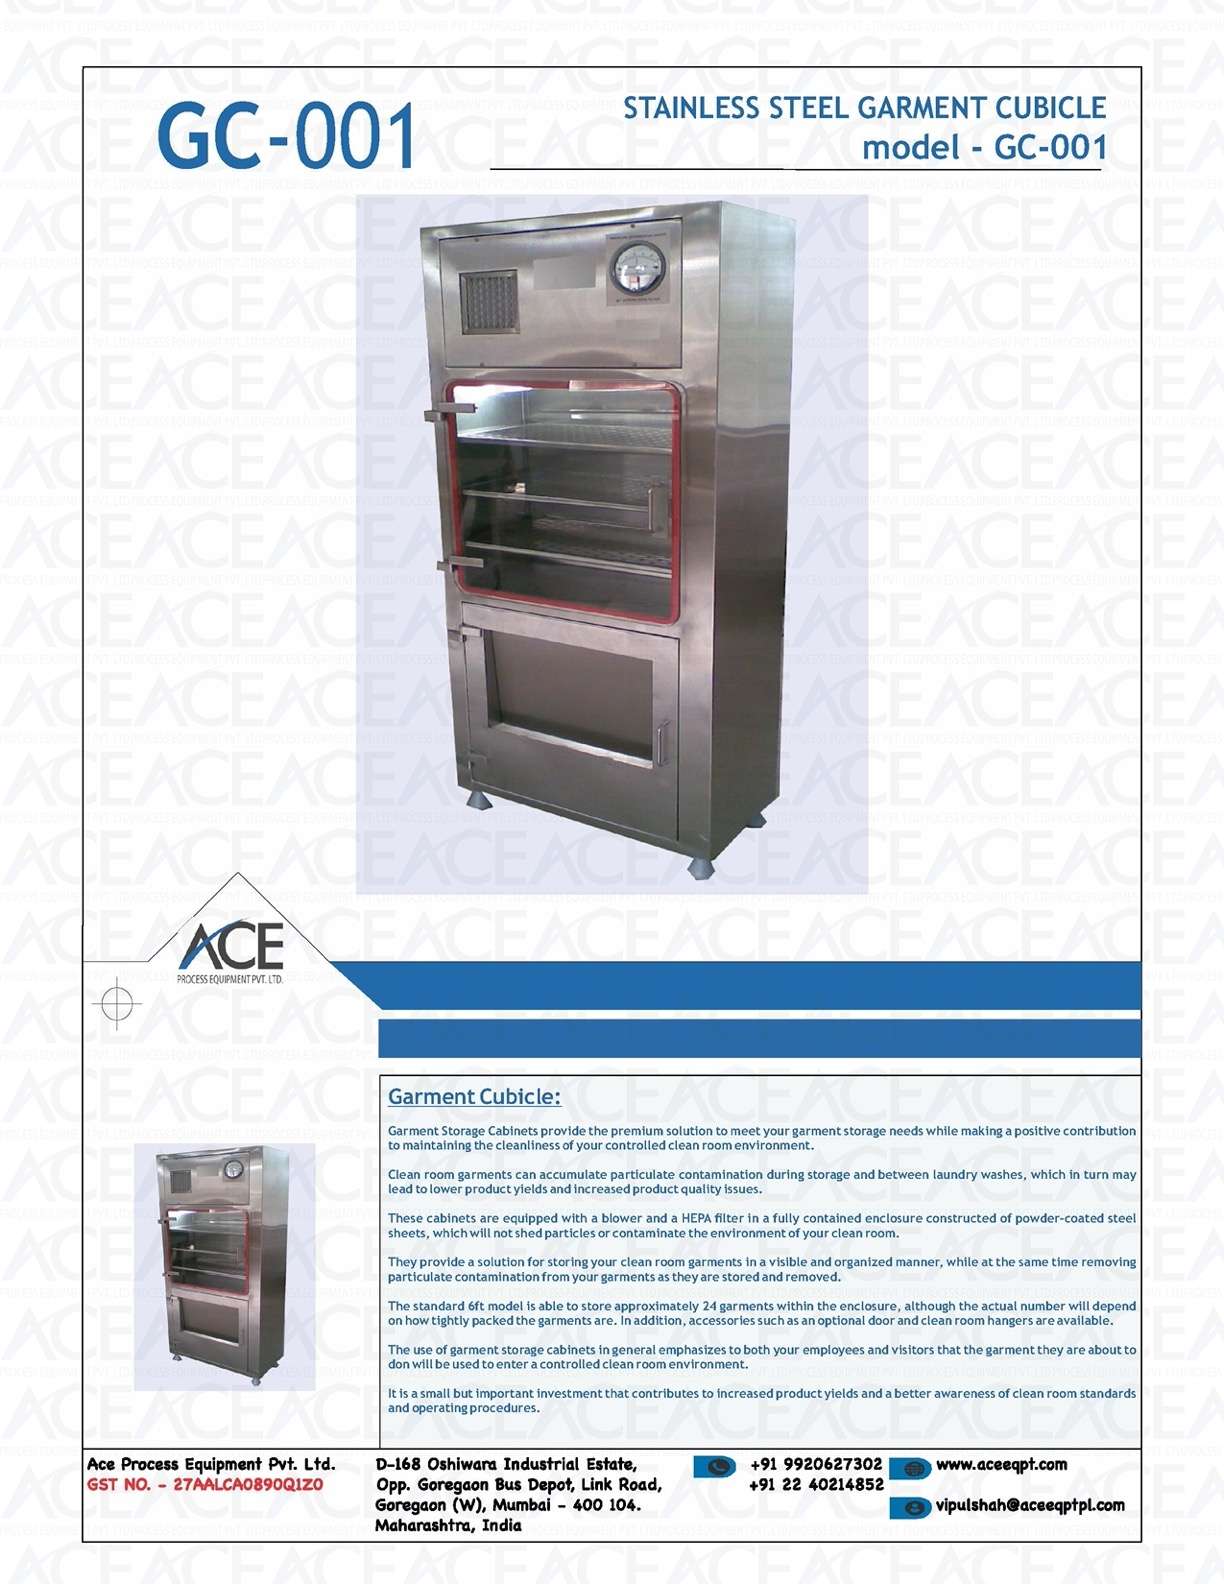 STAINLESS STEEL GARMENT CUBICLE CABINET